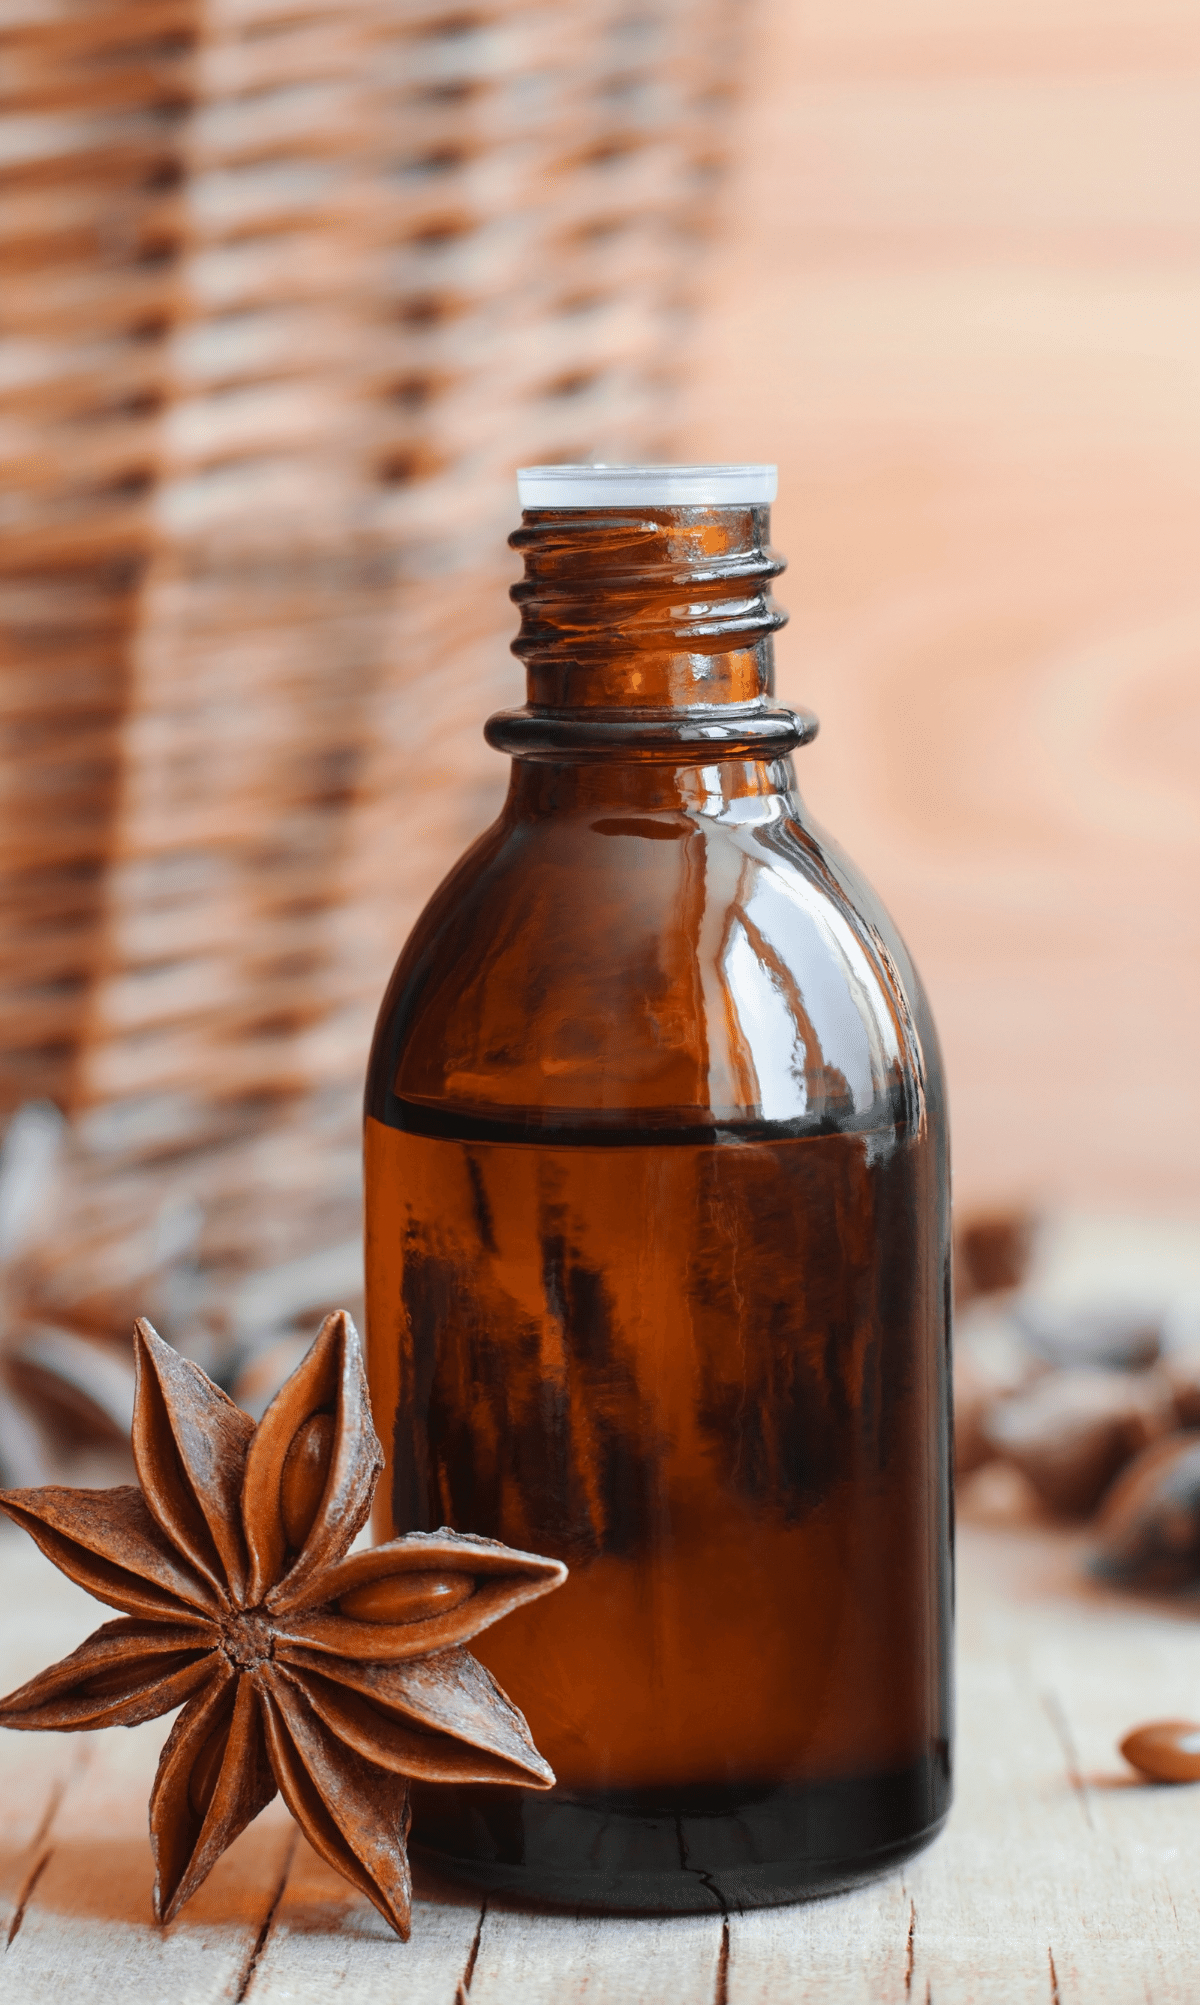 Anise Oil for Baking: A Tasty and Aromatic Surprise!